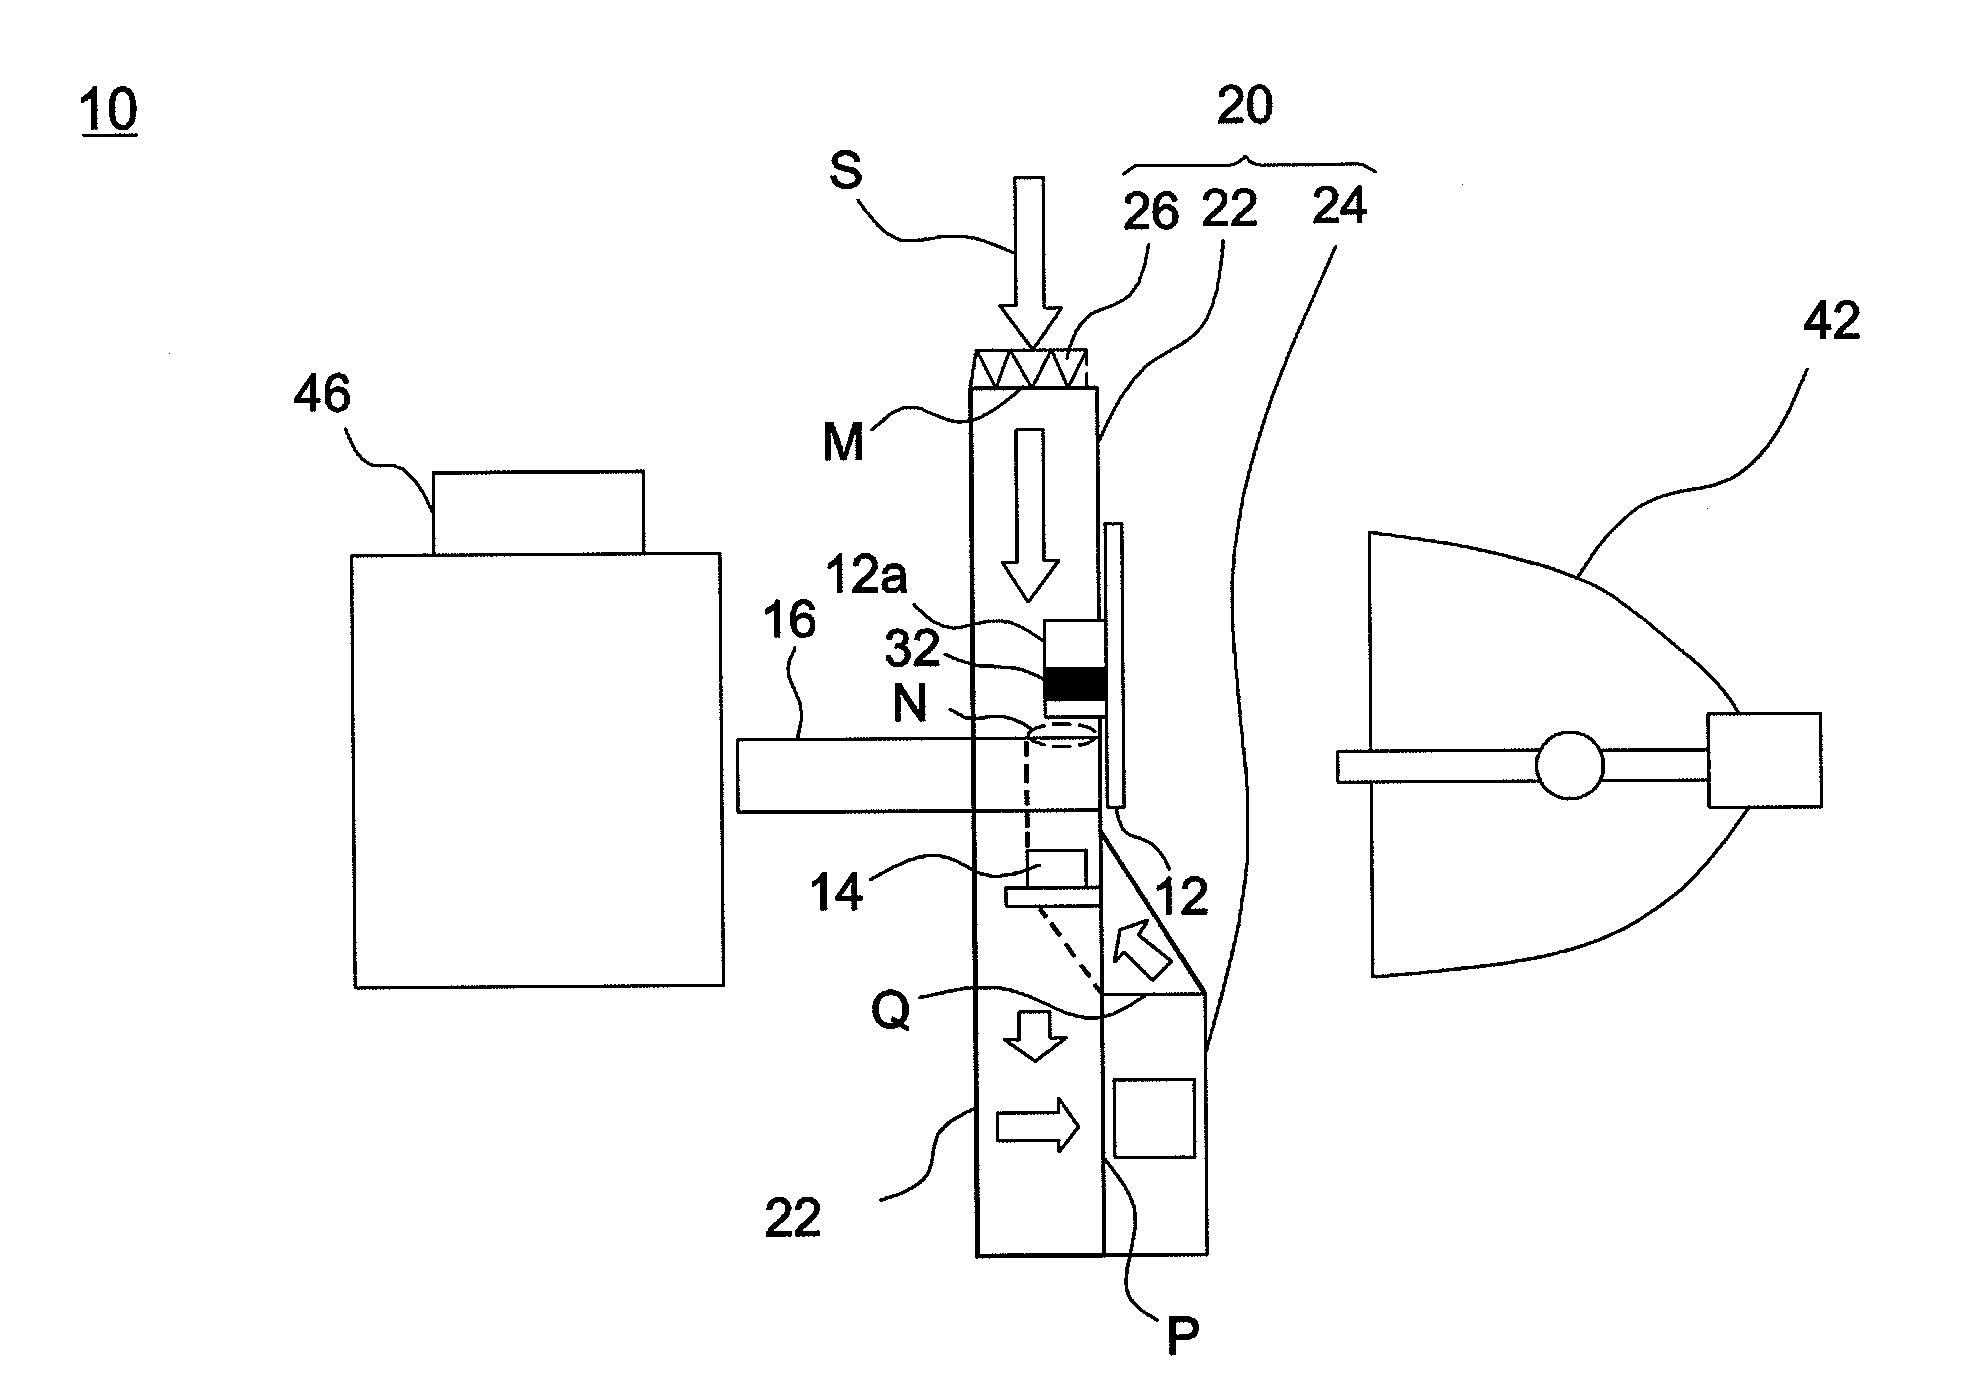 Heat dissipation module for optical projection system